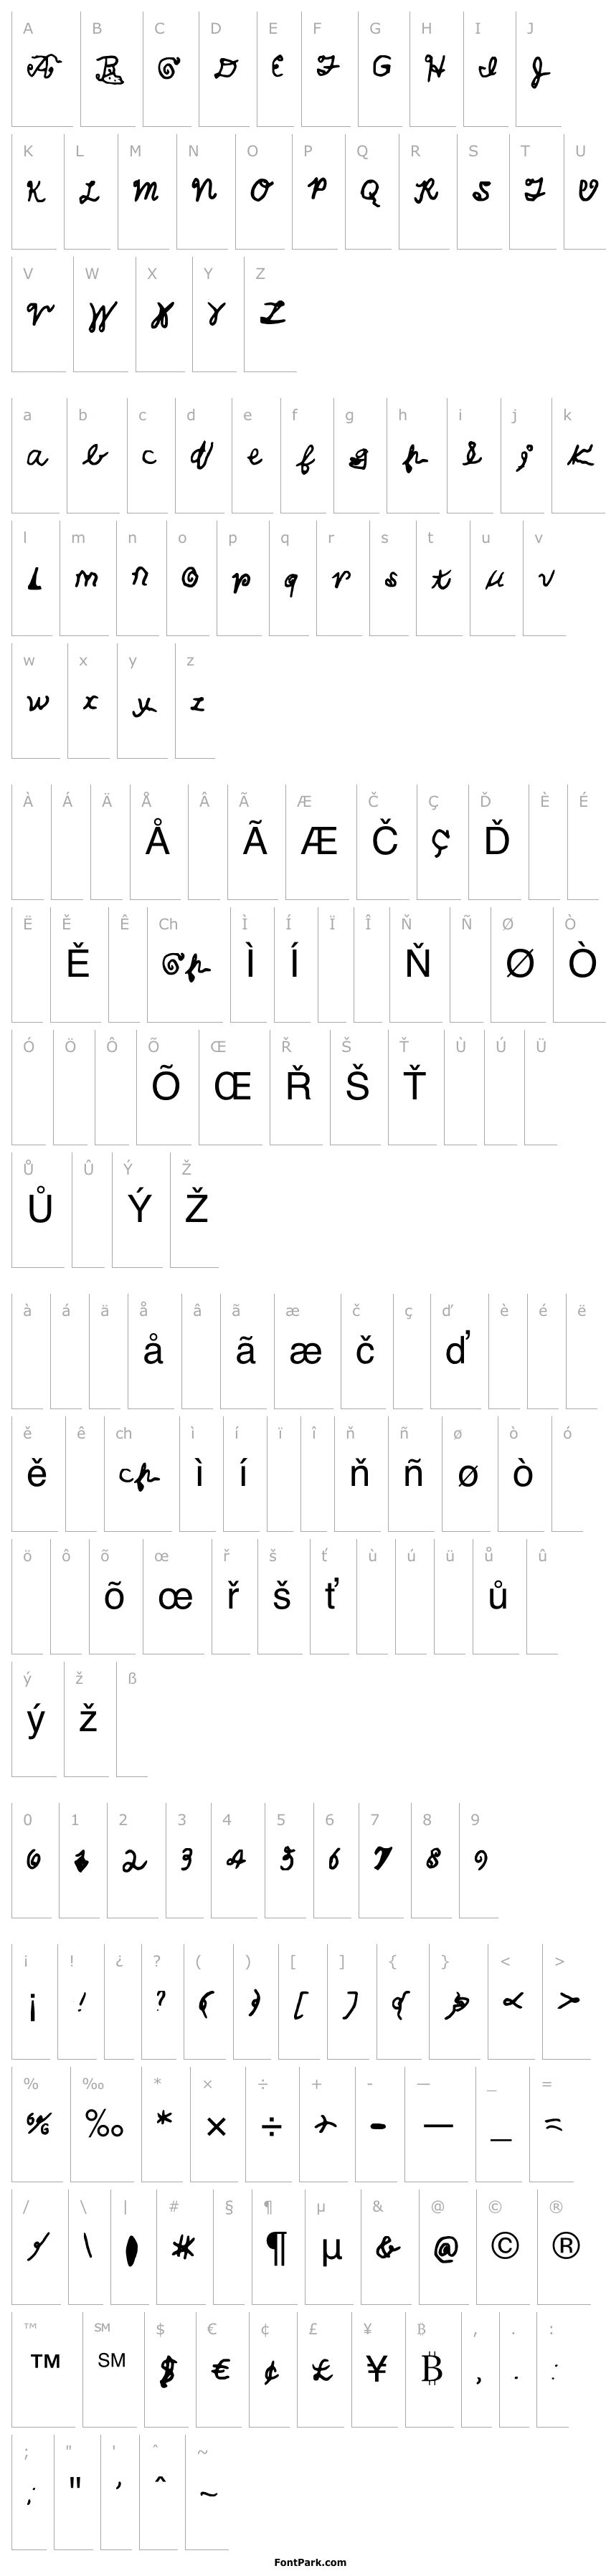 Přehled CalebsCoolHandwriting